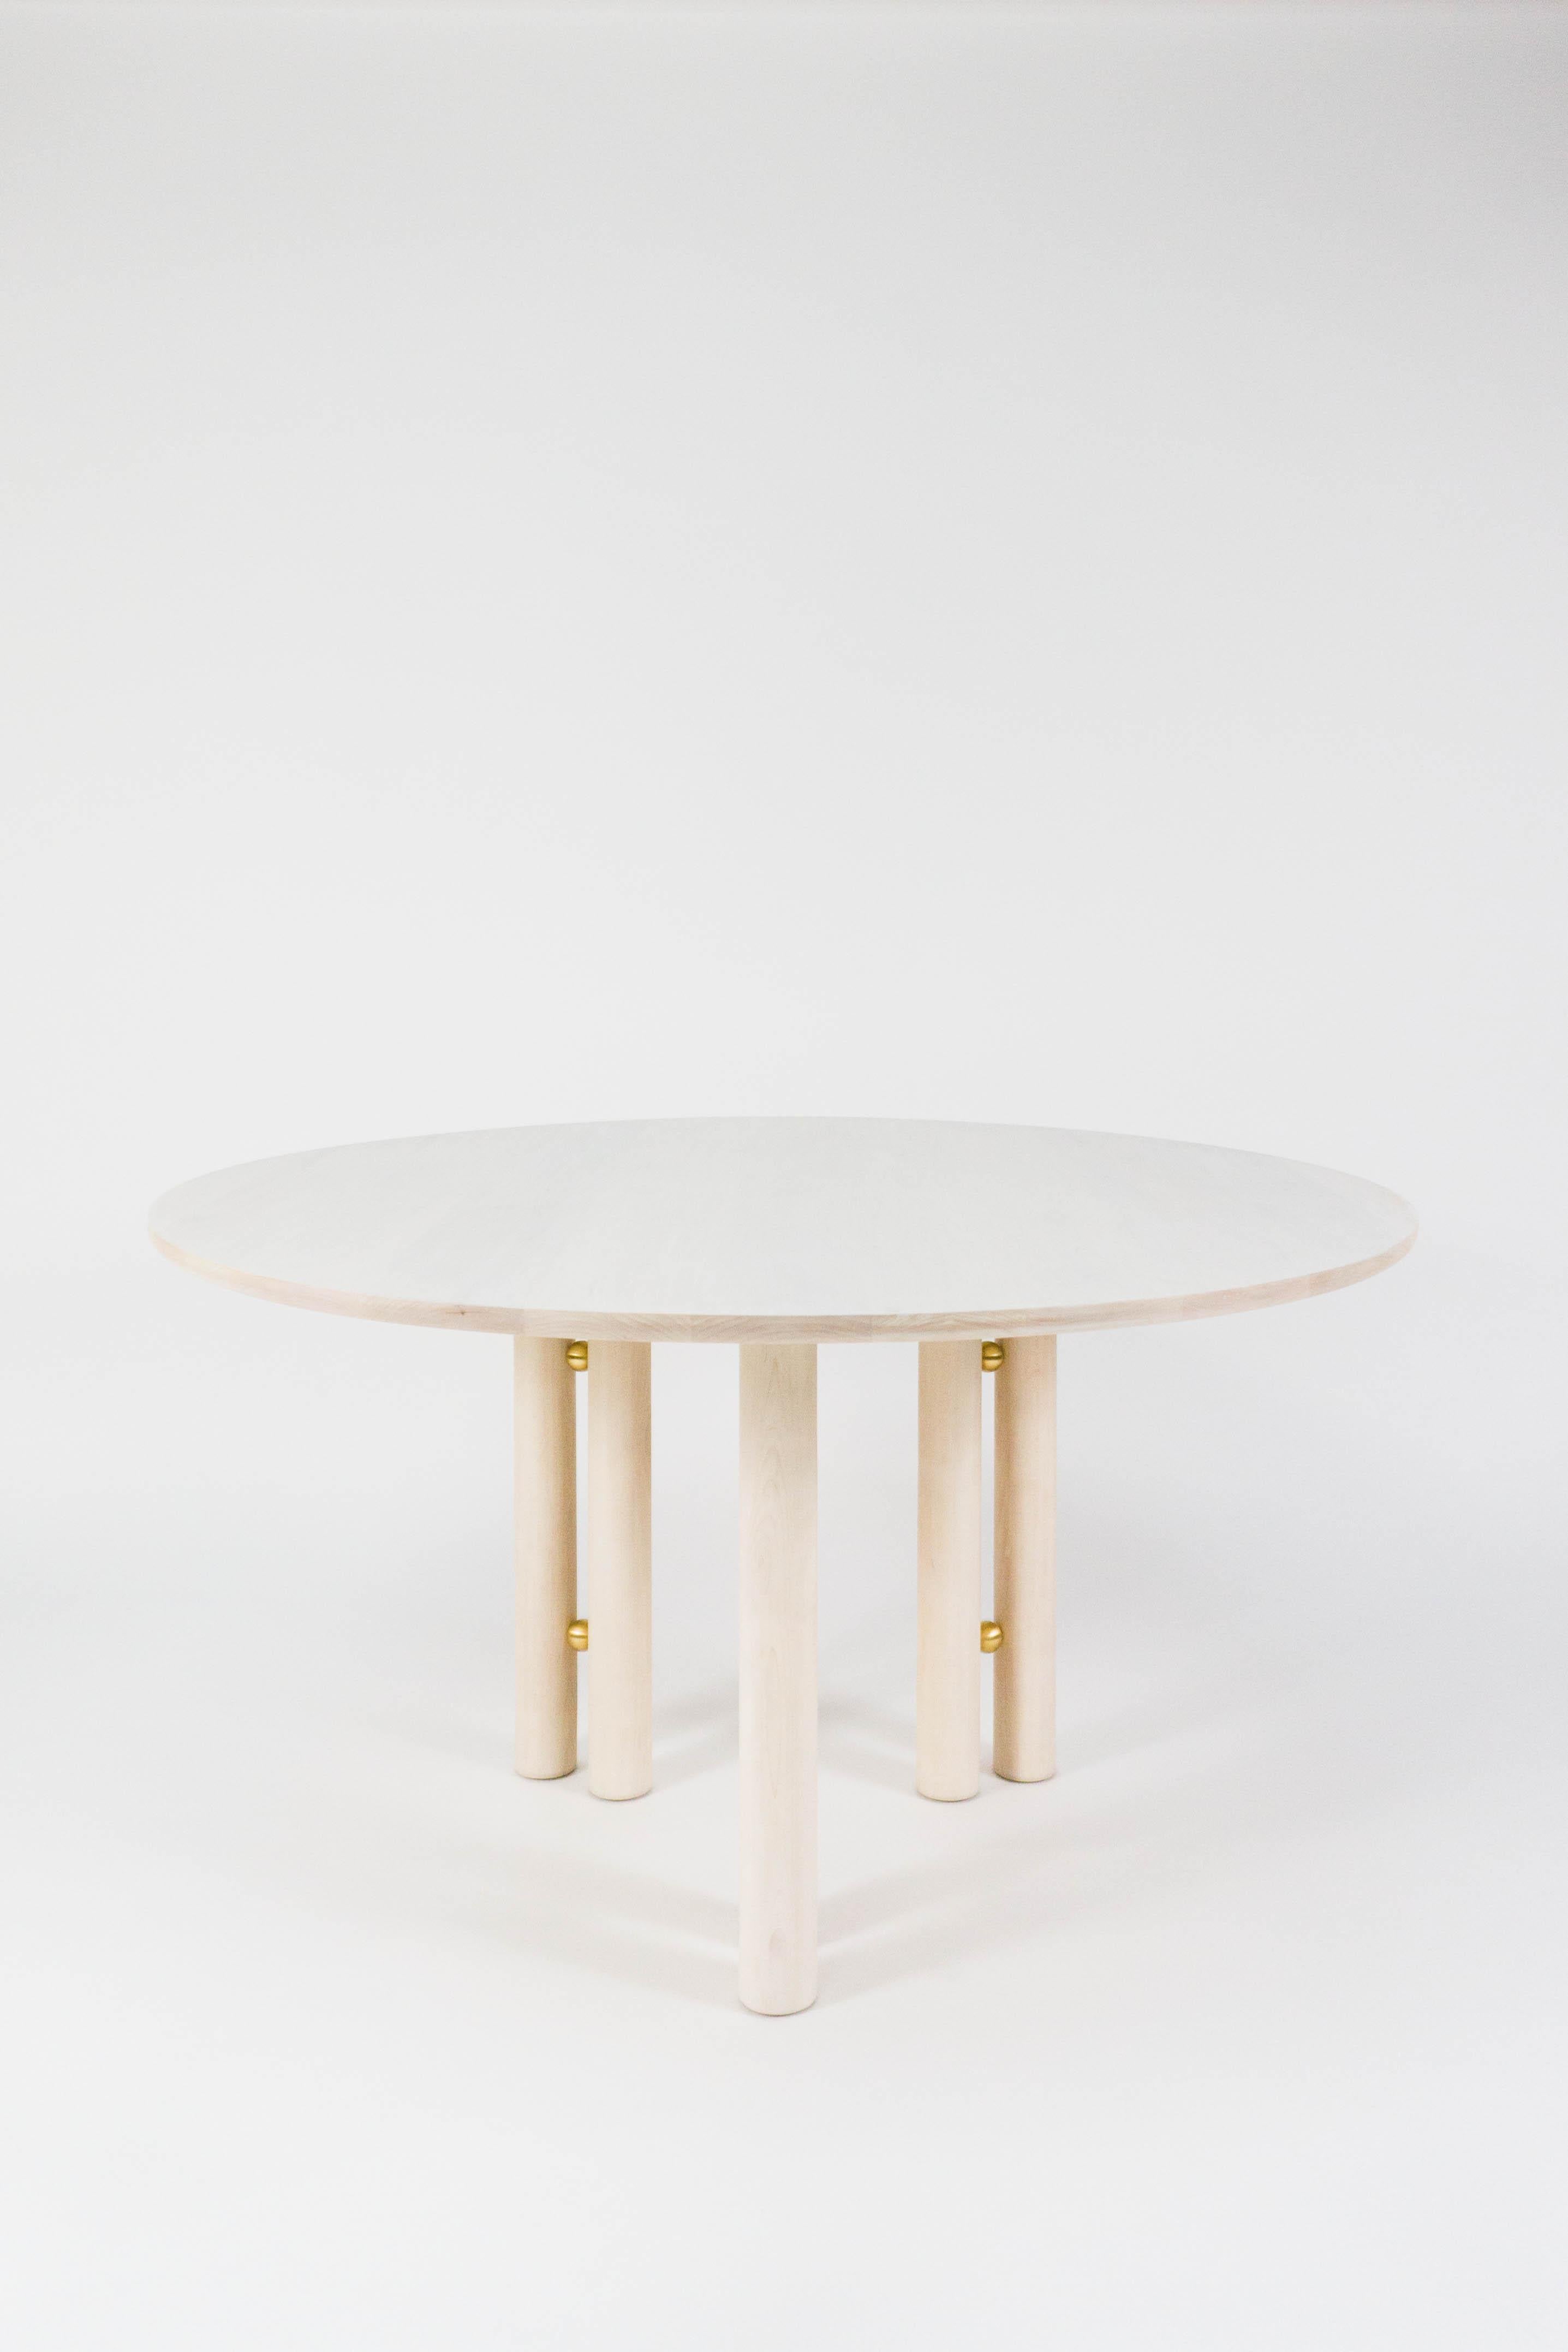 American Martini Dining Table in Bleached Maple by Steven Bukowski For Sale